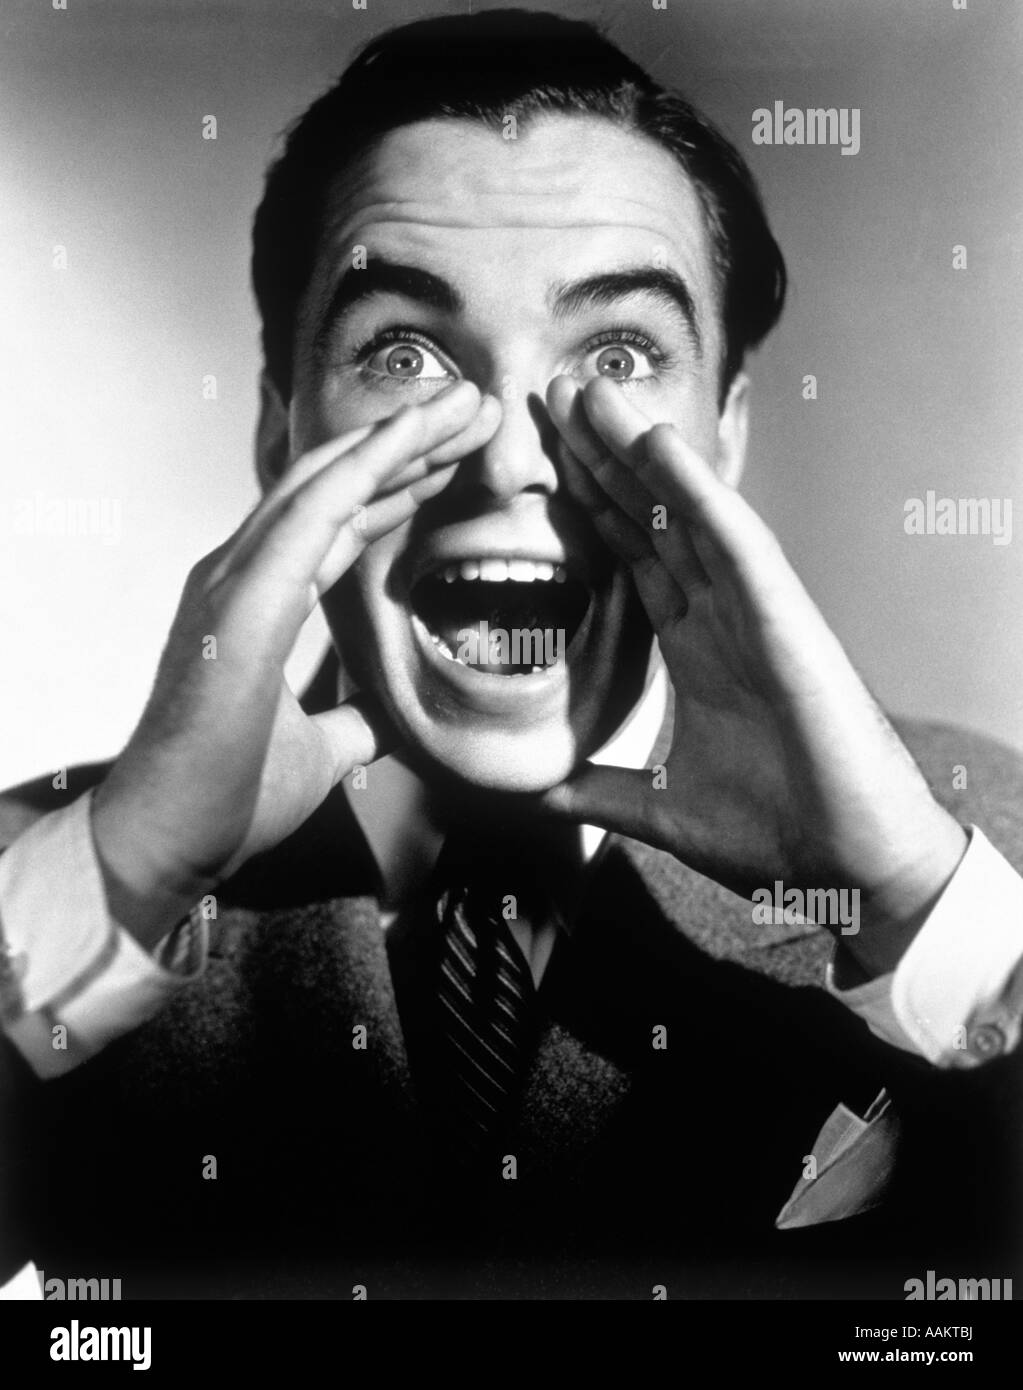 1940s 1950s EXCITED MAN WITH HANDS CUPPED AROUND MOUTH SHOUTING Stock Photo